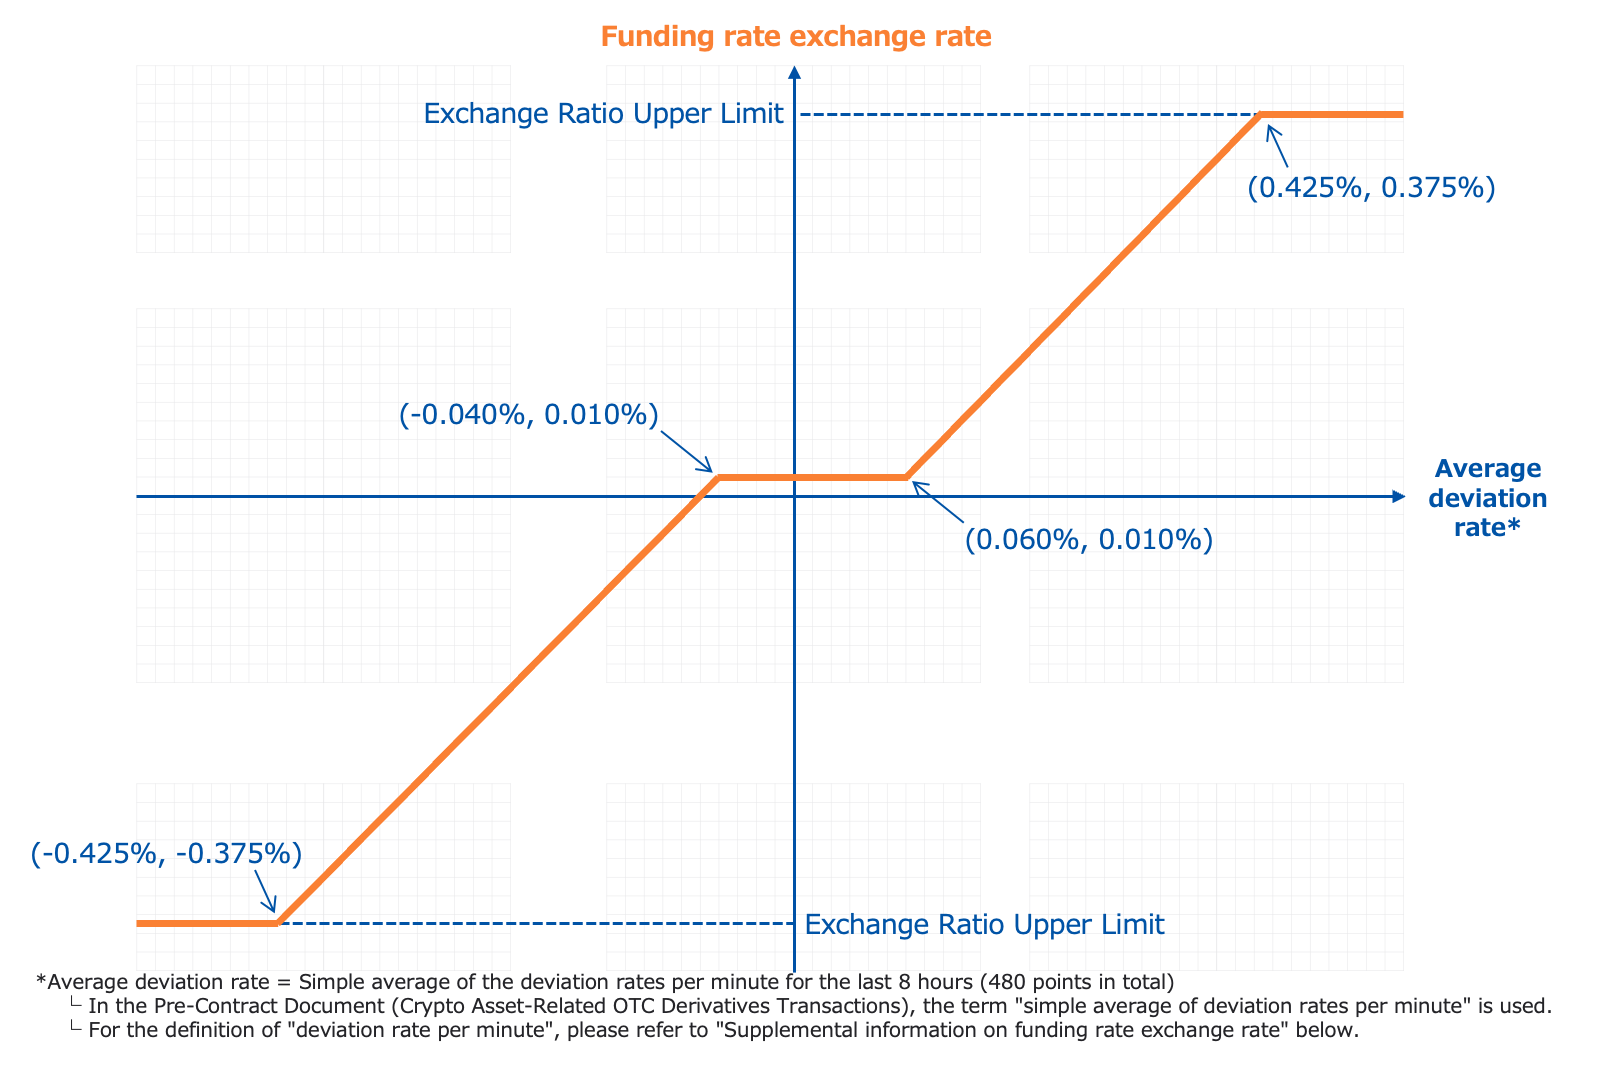 Relationship between the funding rate exchange rate and the average deviation rate